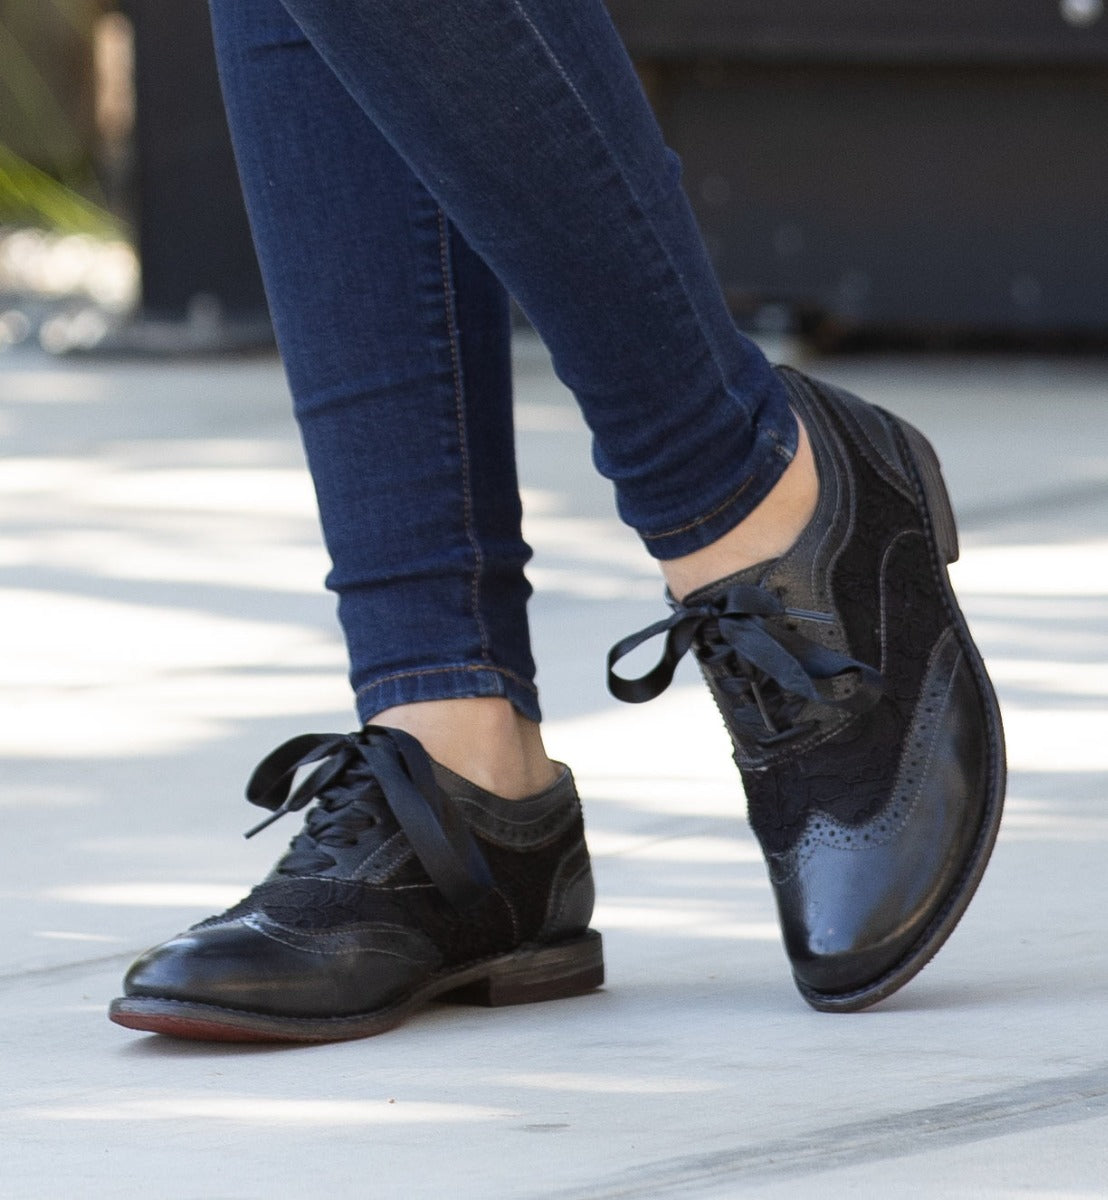 Comfortable black suede Maude wingtip oxford shoes perfect for any wardrobe. (Brand: Oak Tree Farms)